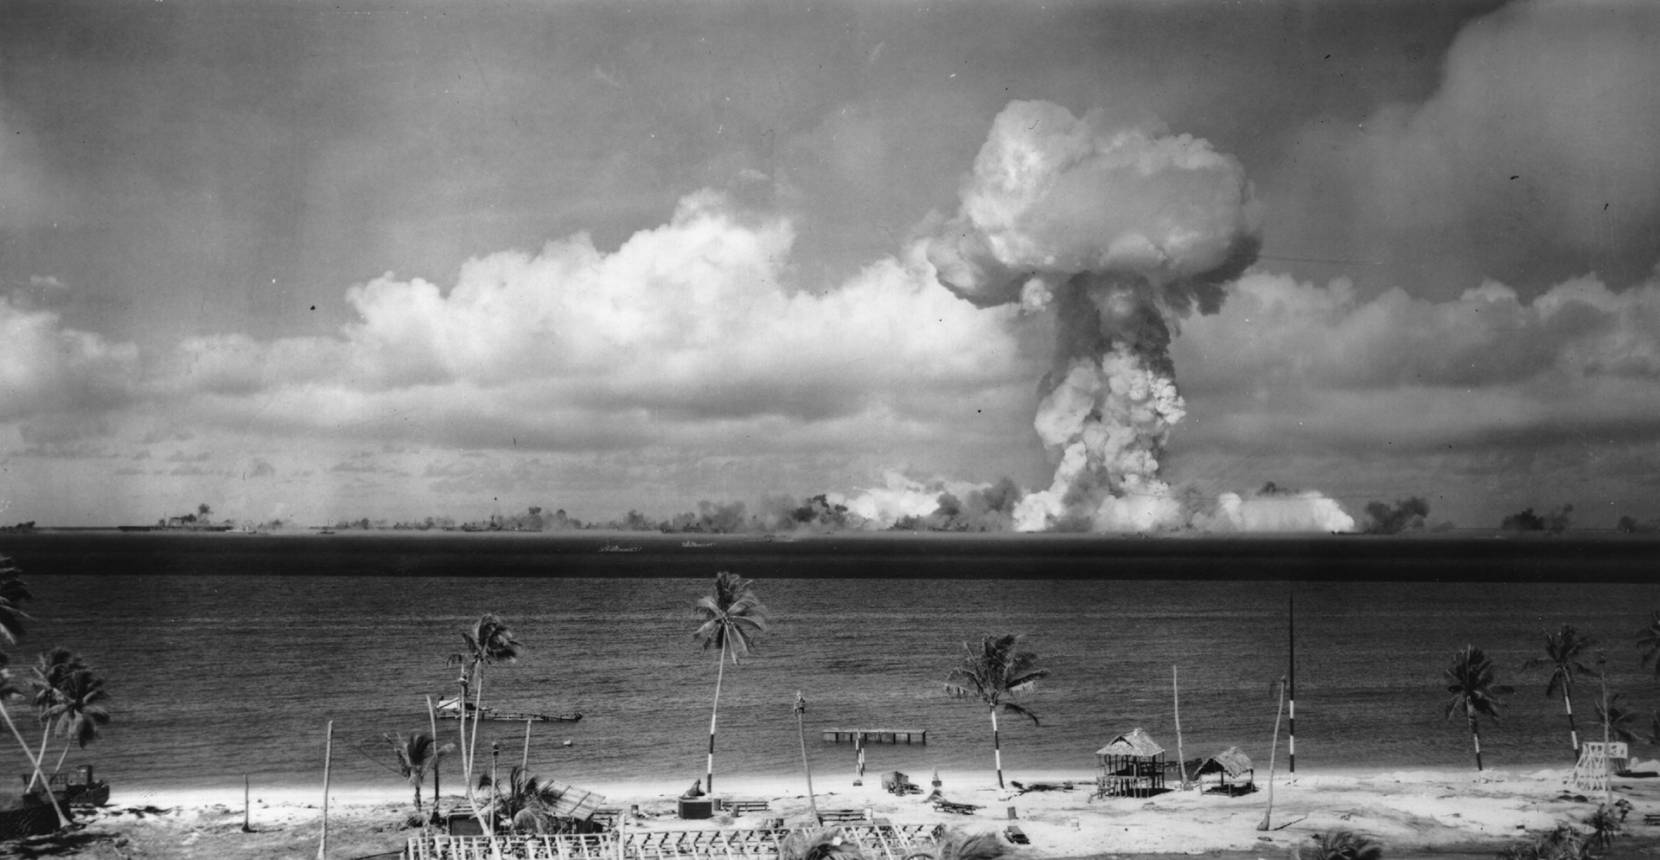 July 1946: A mushroom cloud forms after the initial Atomic Bomb test explosion off the coast of Bikini Atoll, Marshall Islands. (Photo by Keystone/Getty Images)